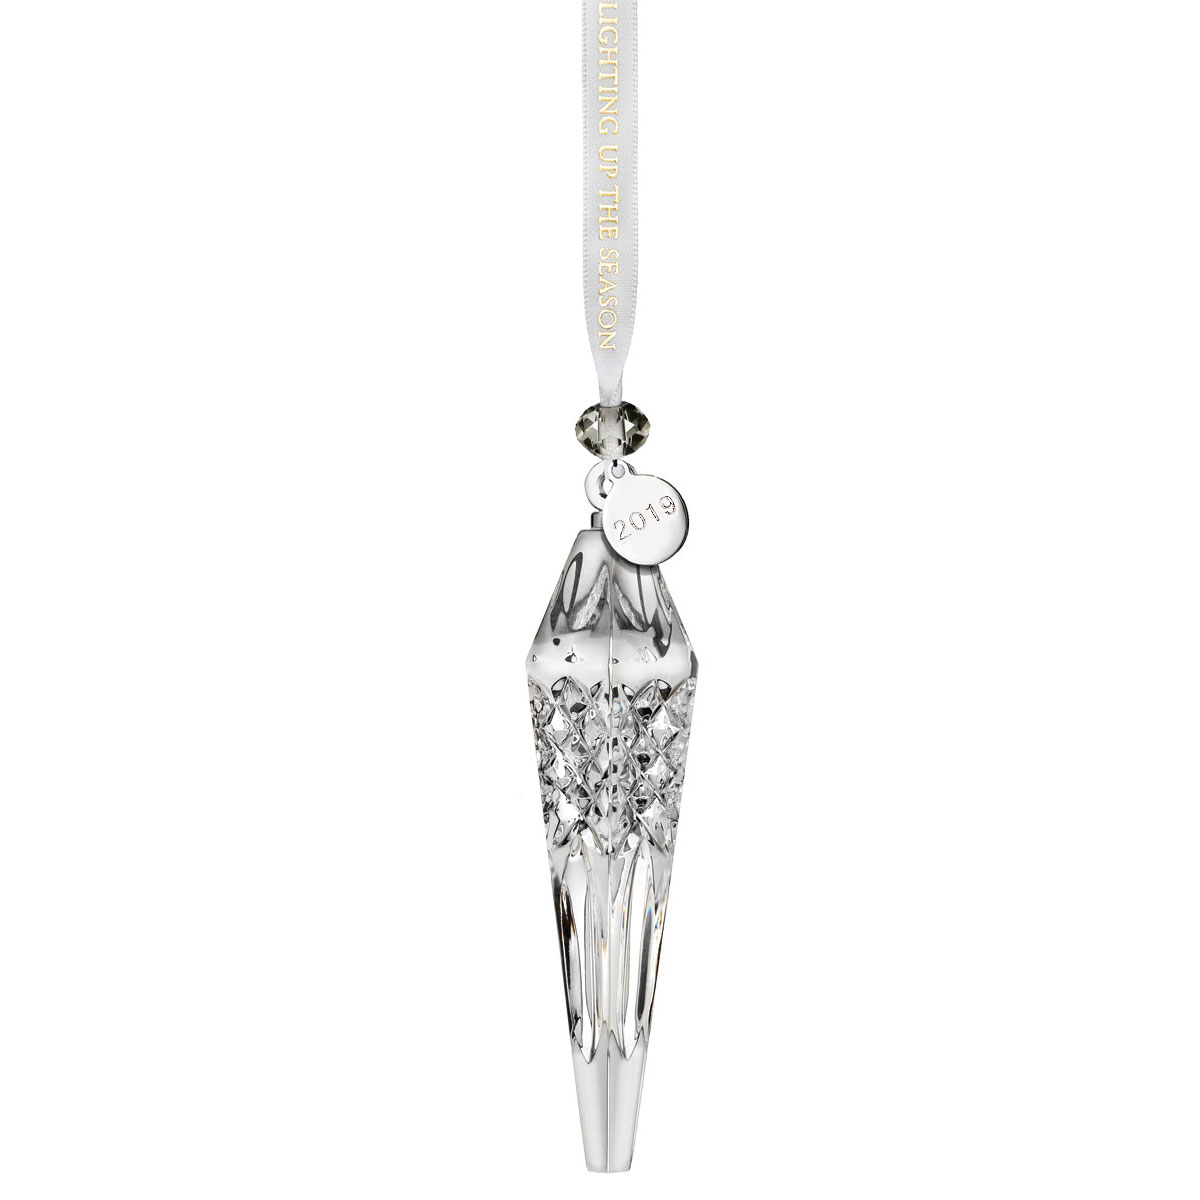 Waterford Lismore Icicle Ornament